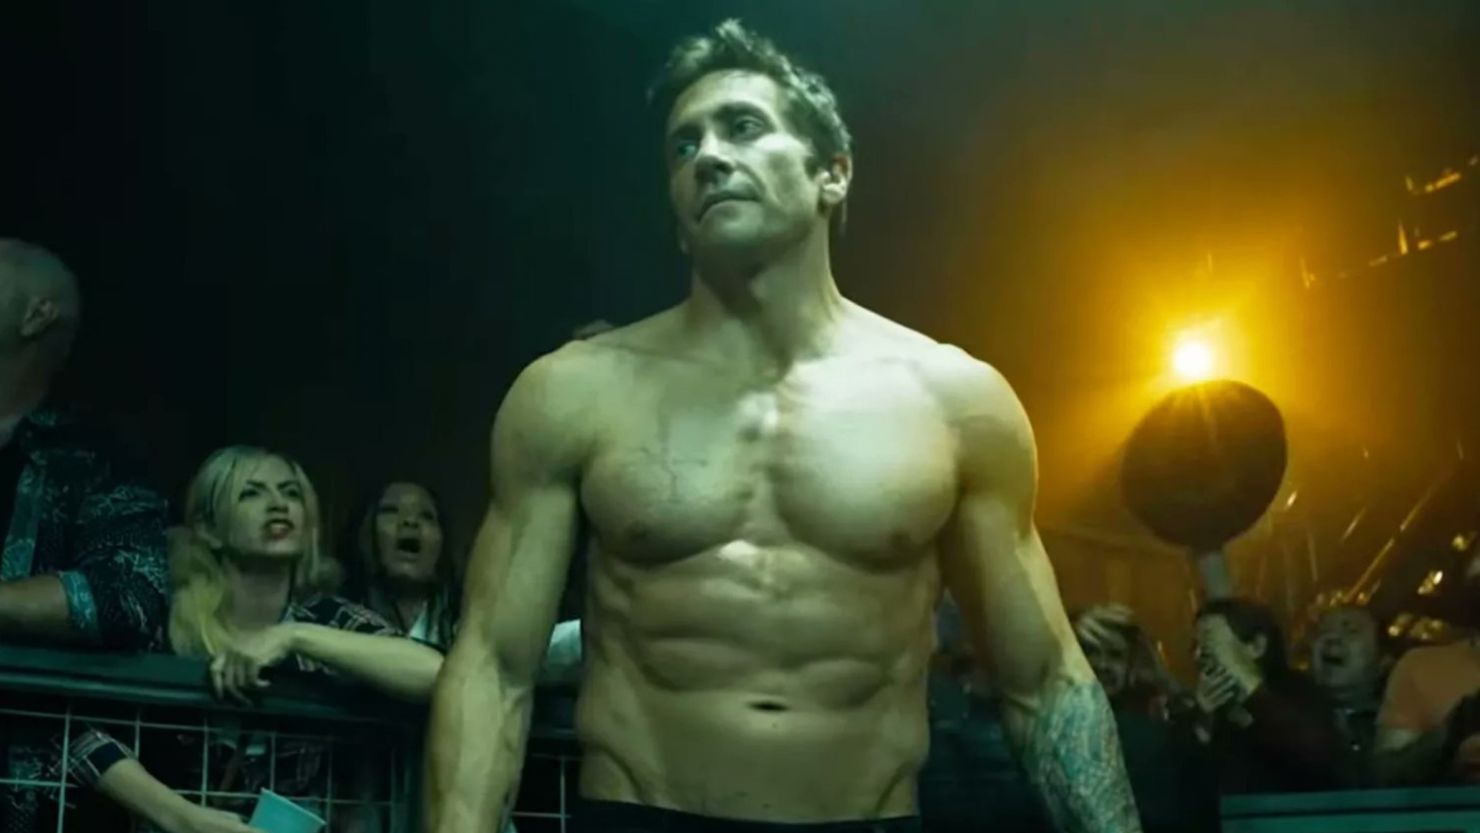 Jake Gyllenhaal is ripped in first look at remake of Patrick Swayze classic  'Road House